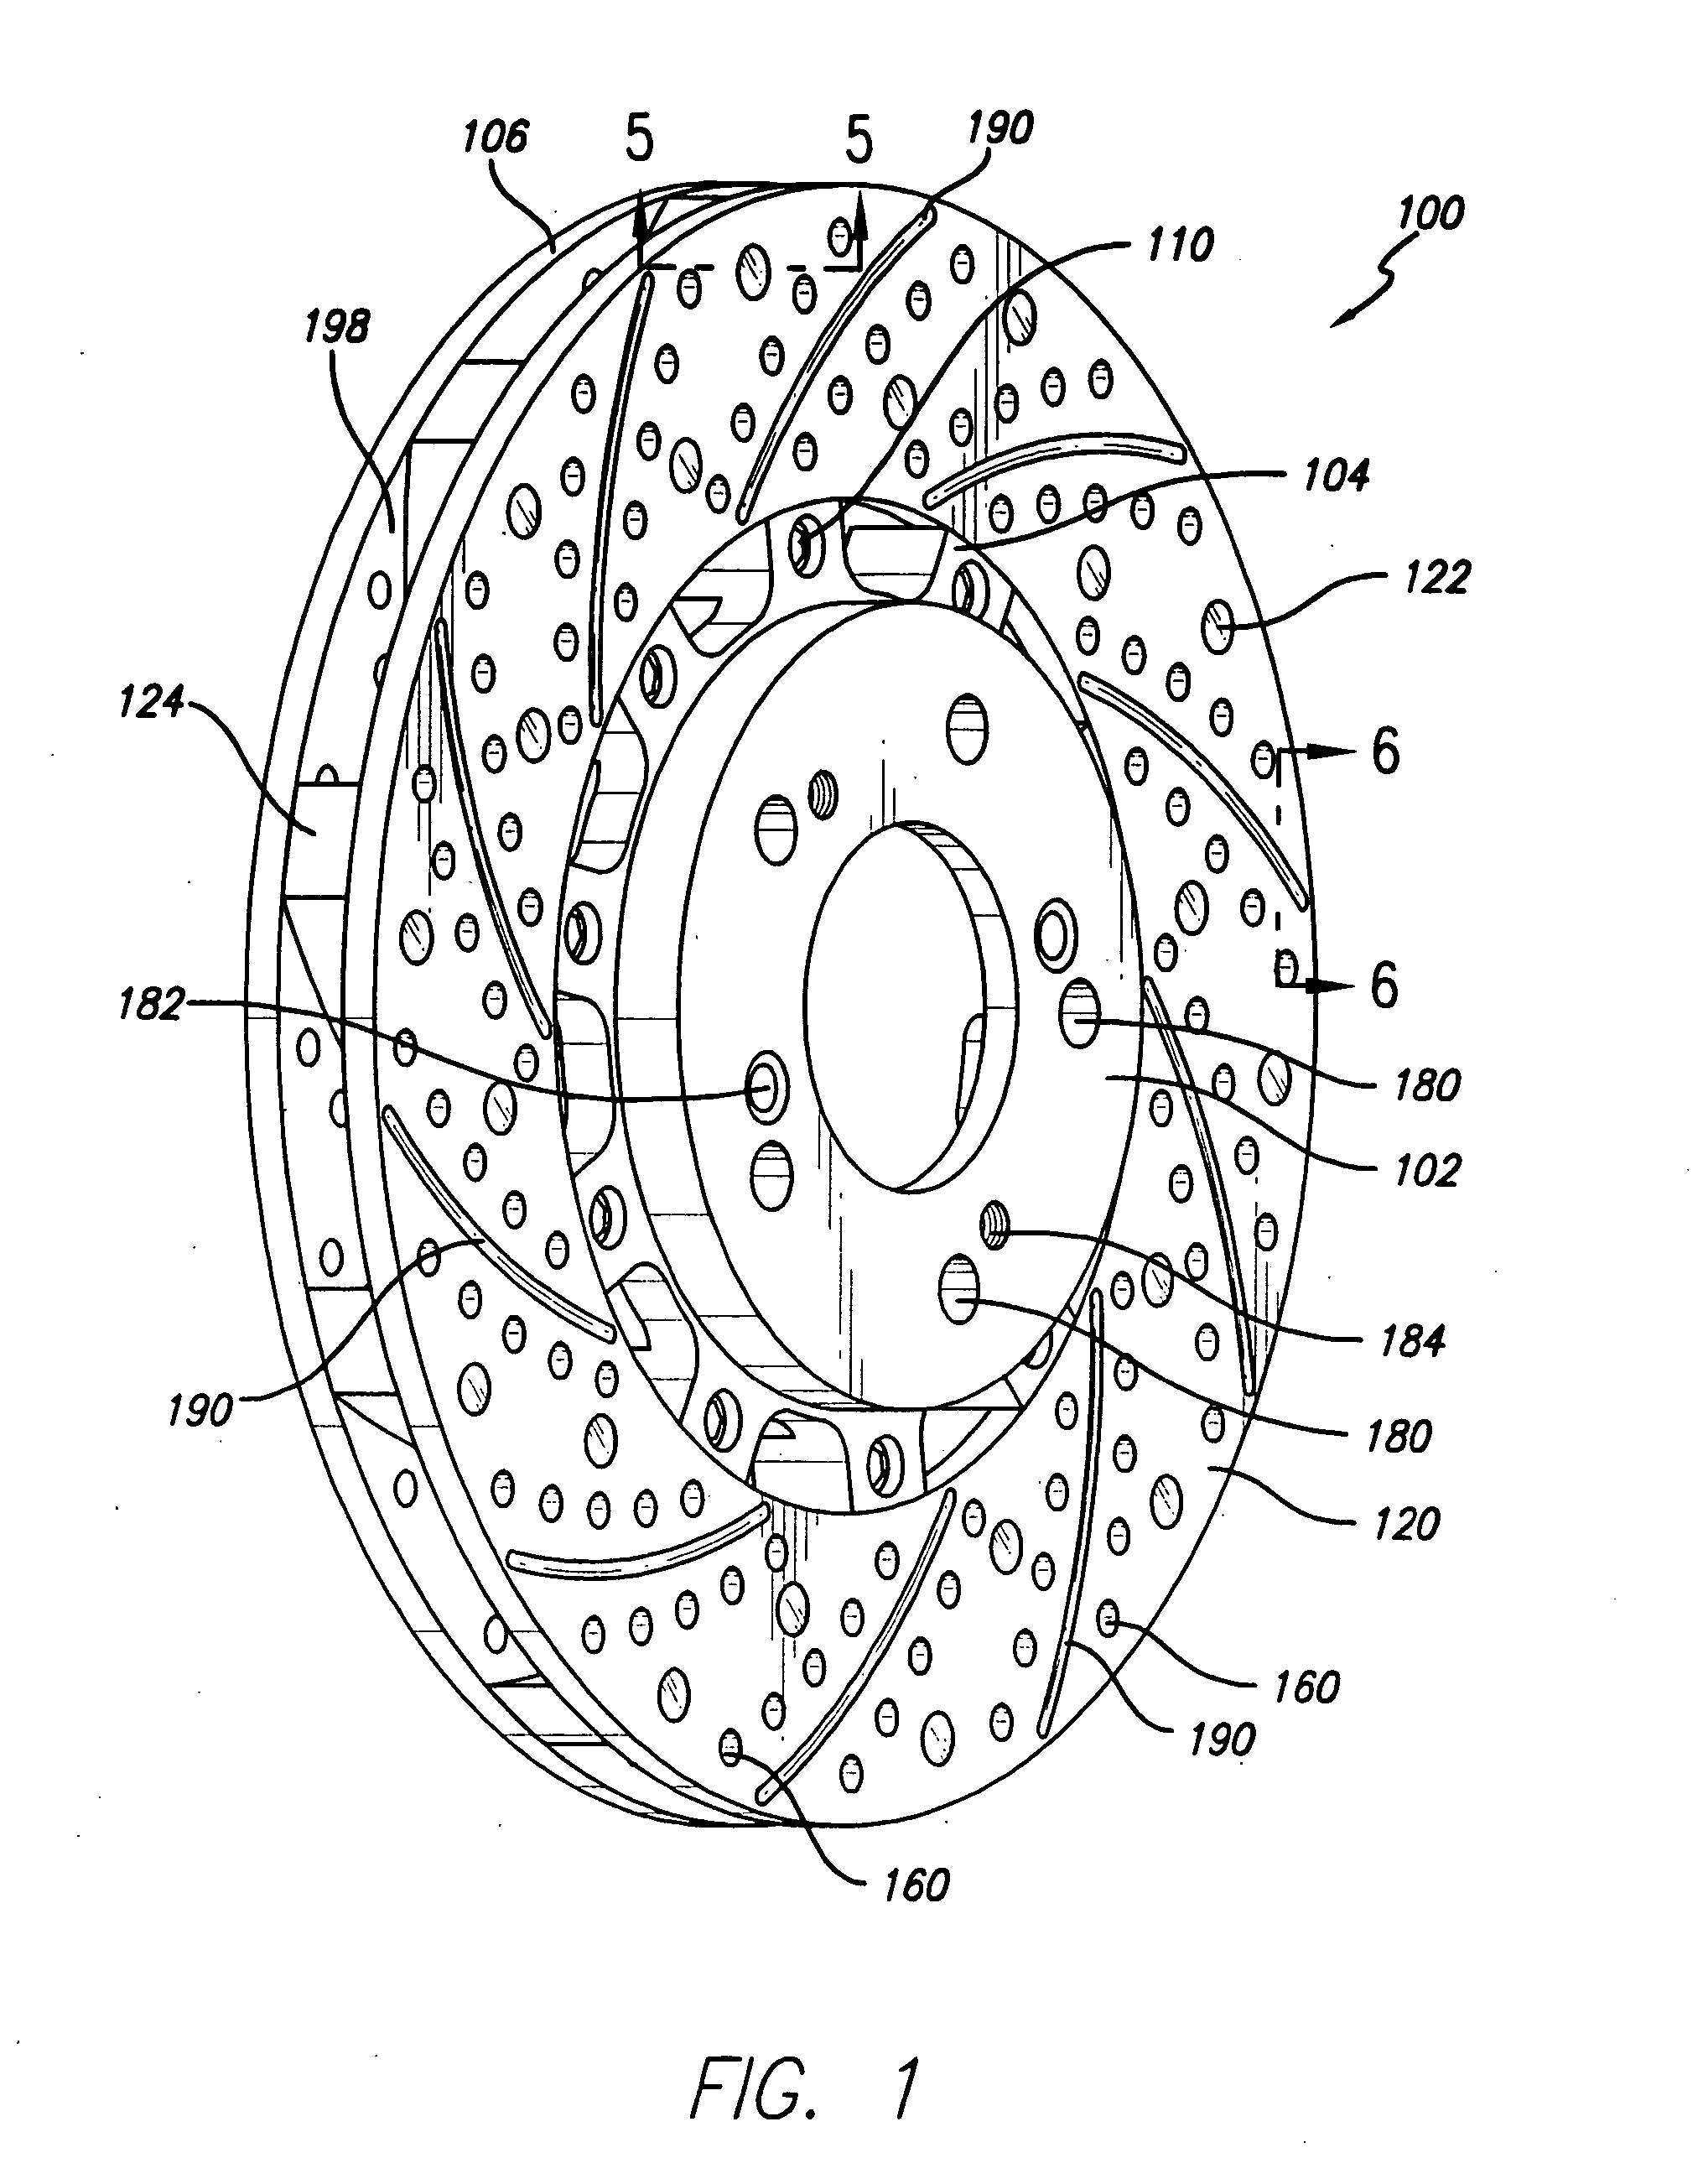 Air-cooled brake rotor system